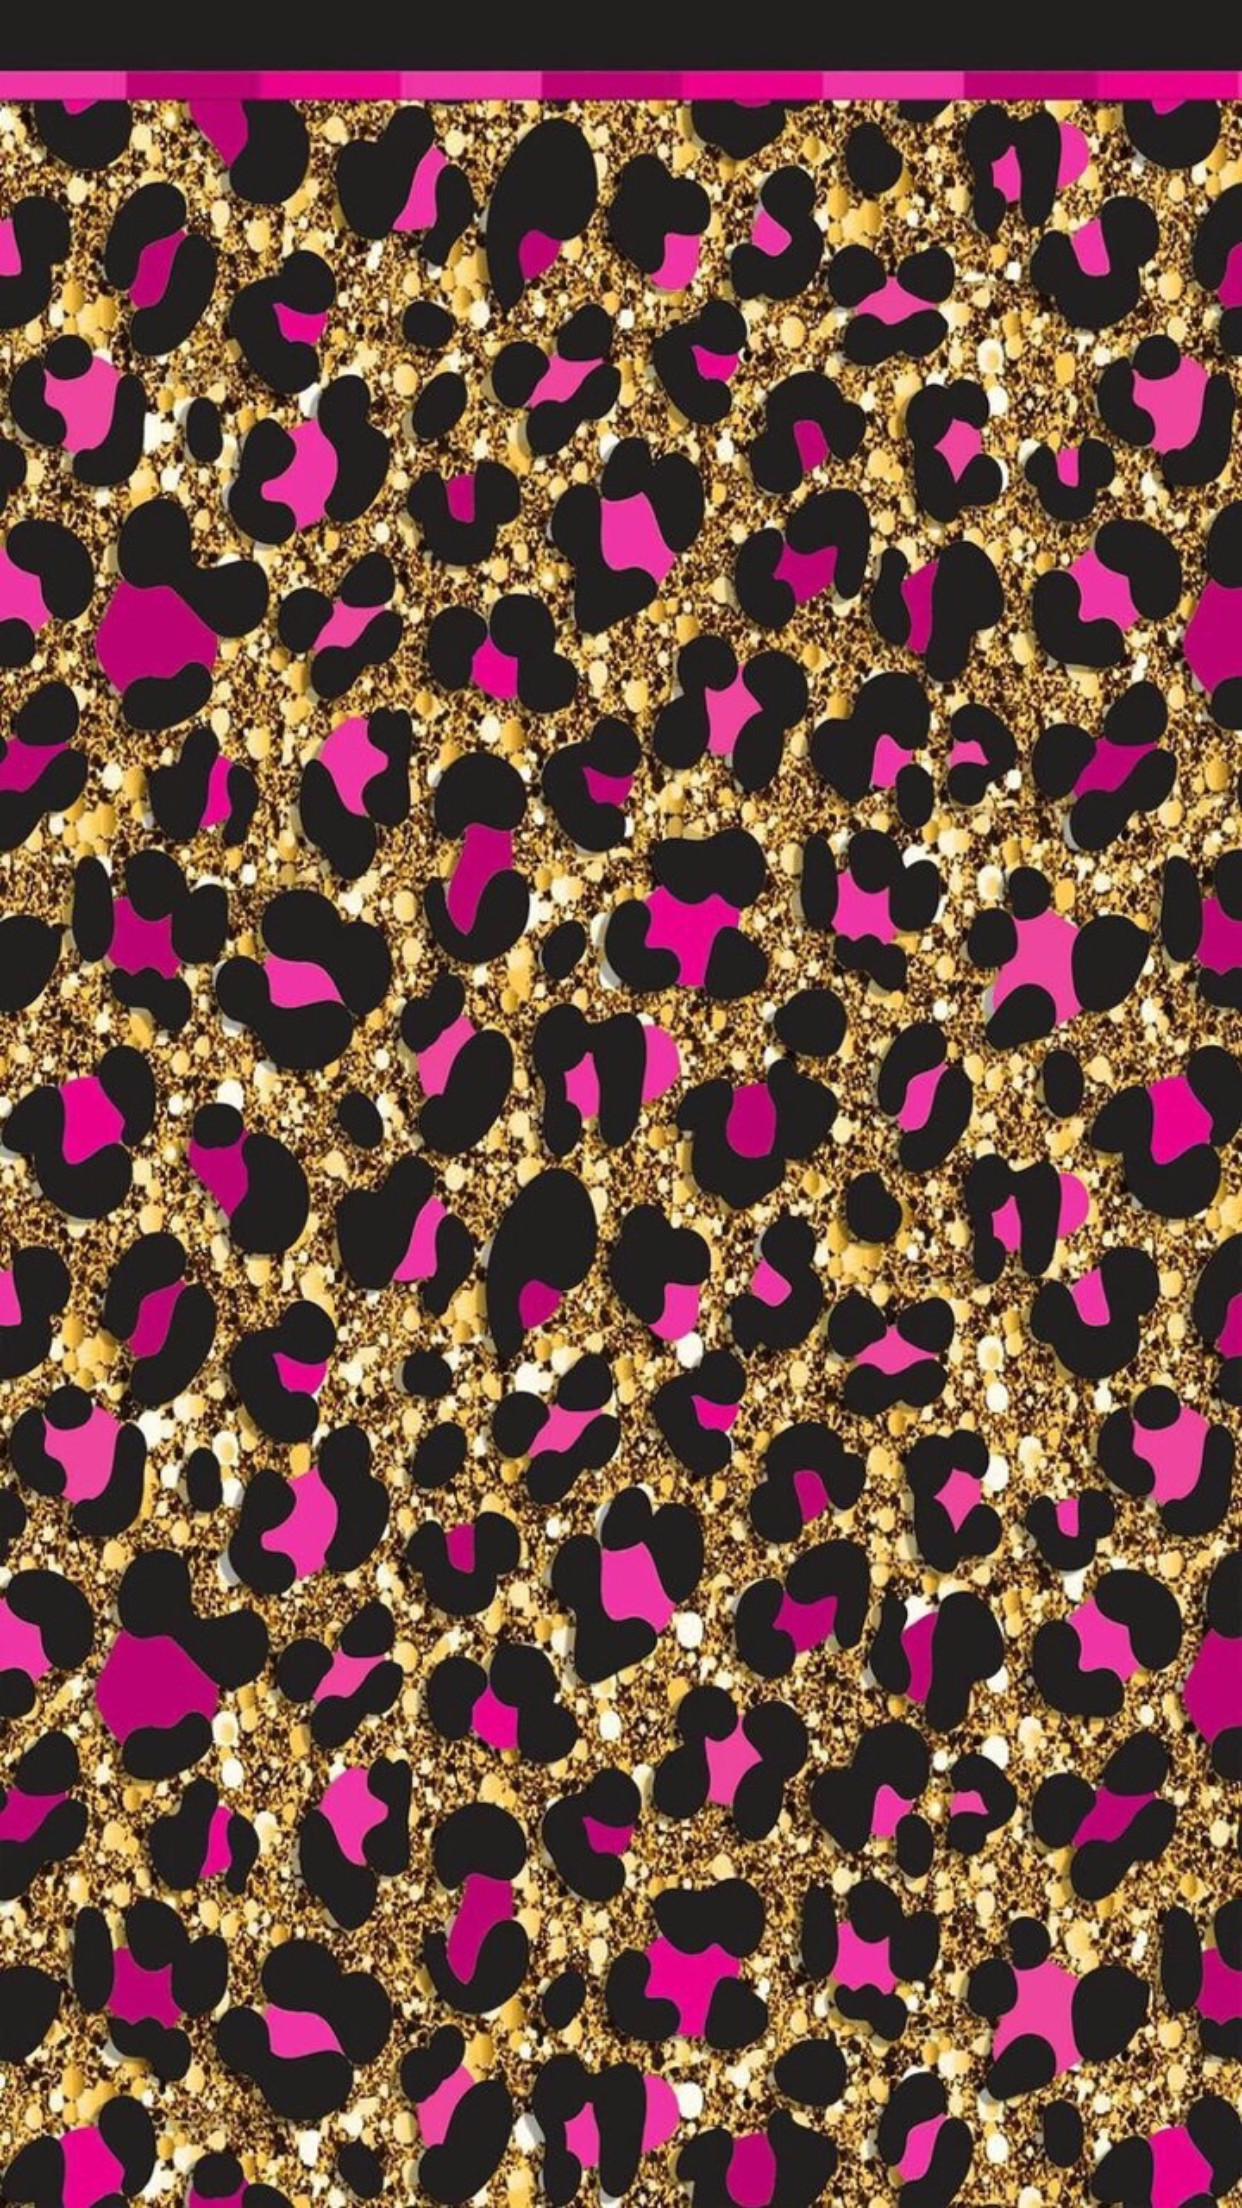 1242x2208, Leopard Print Bedroom, Animal Print Background, - Pink And Gold Leopard Print - HD Wallpaper 